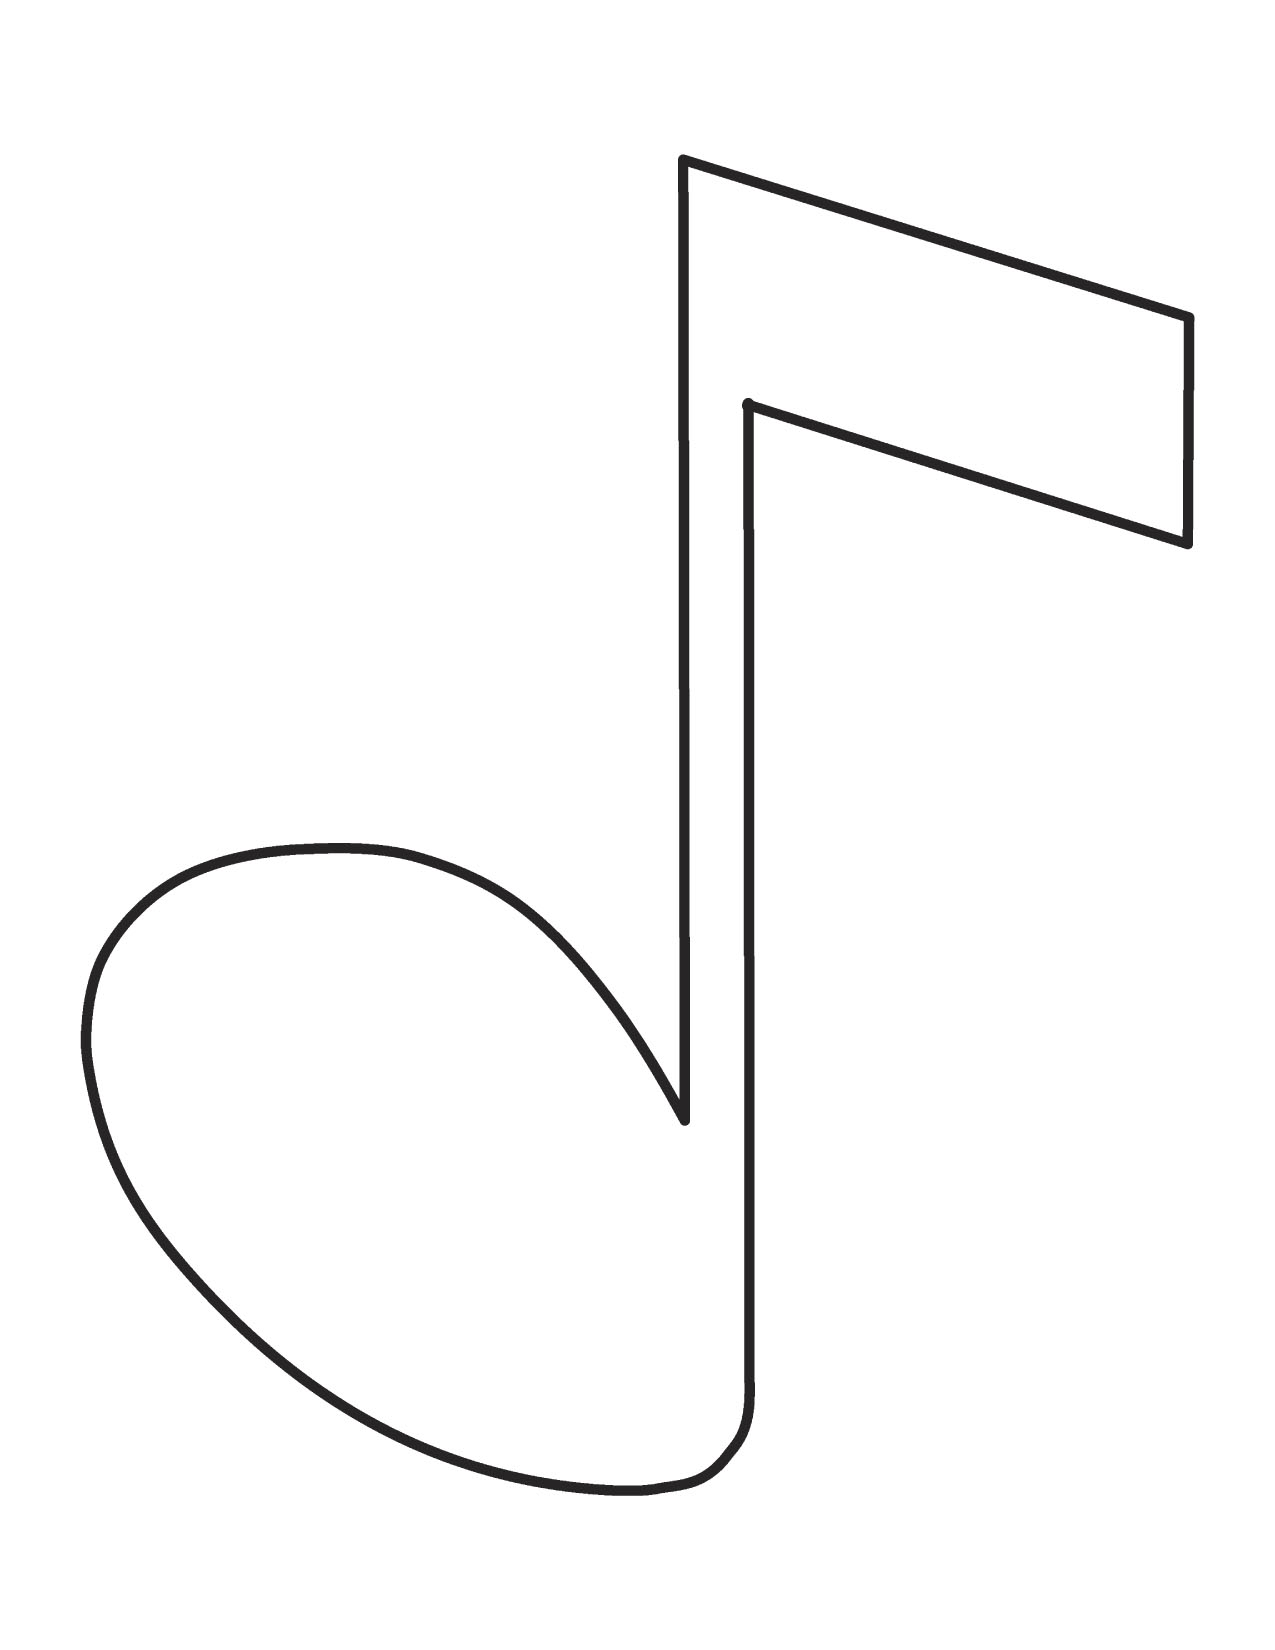 Free Image Of Music Note Download Free Image Of Music Note Png Images Free Cliparts On Clipart Library